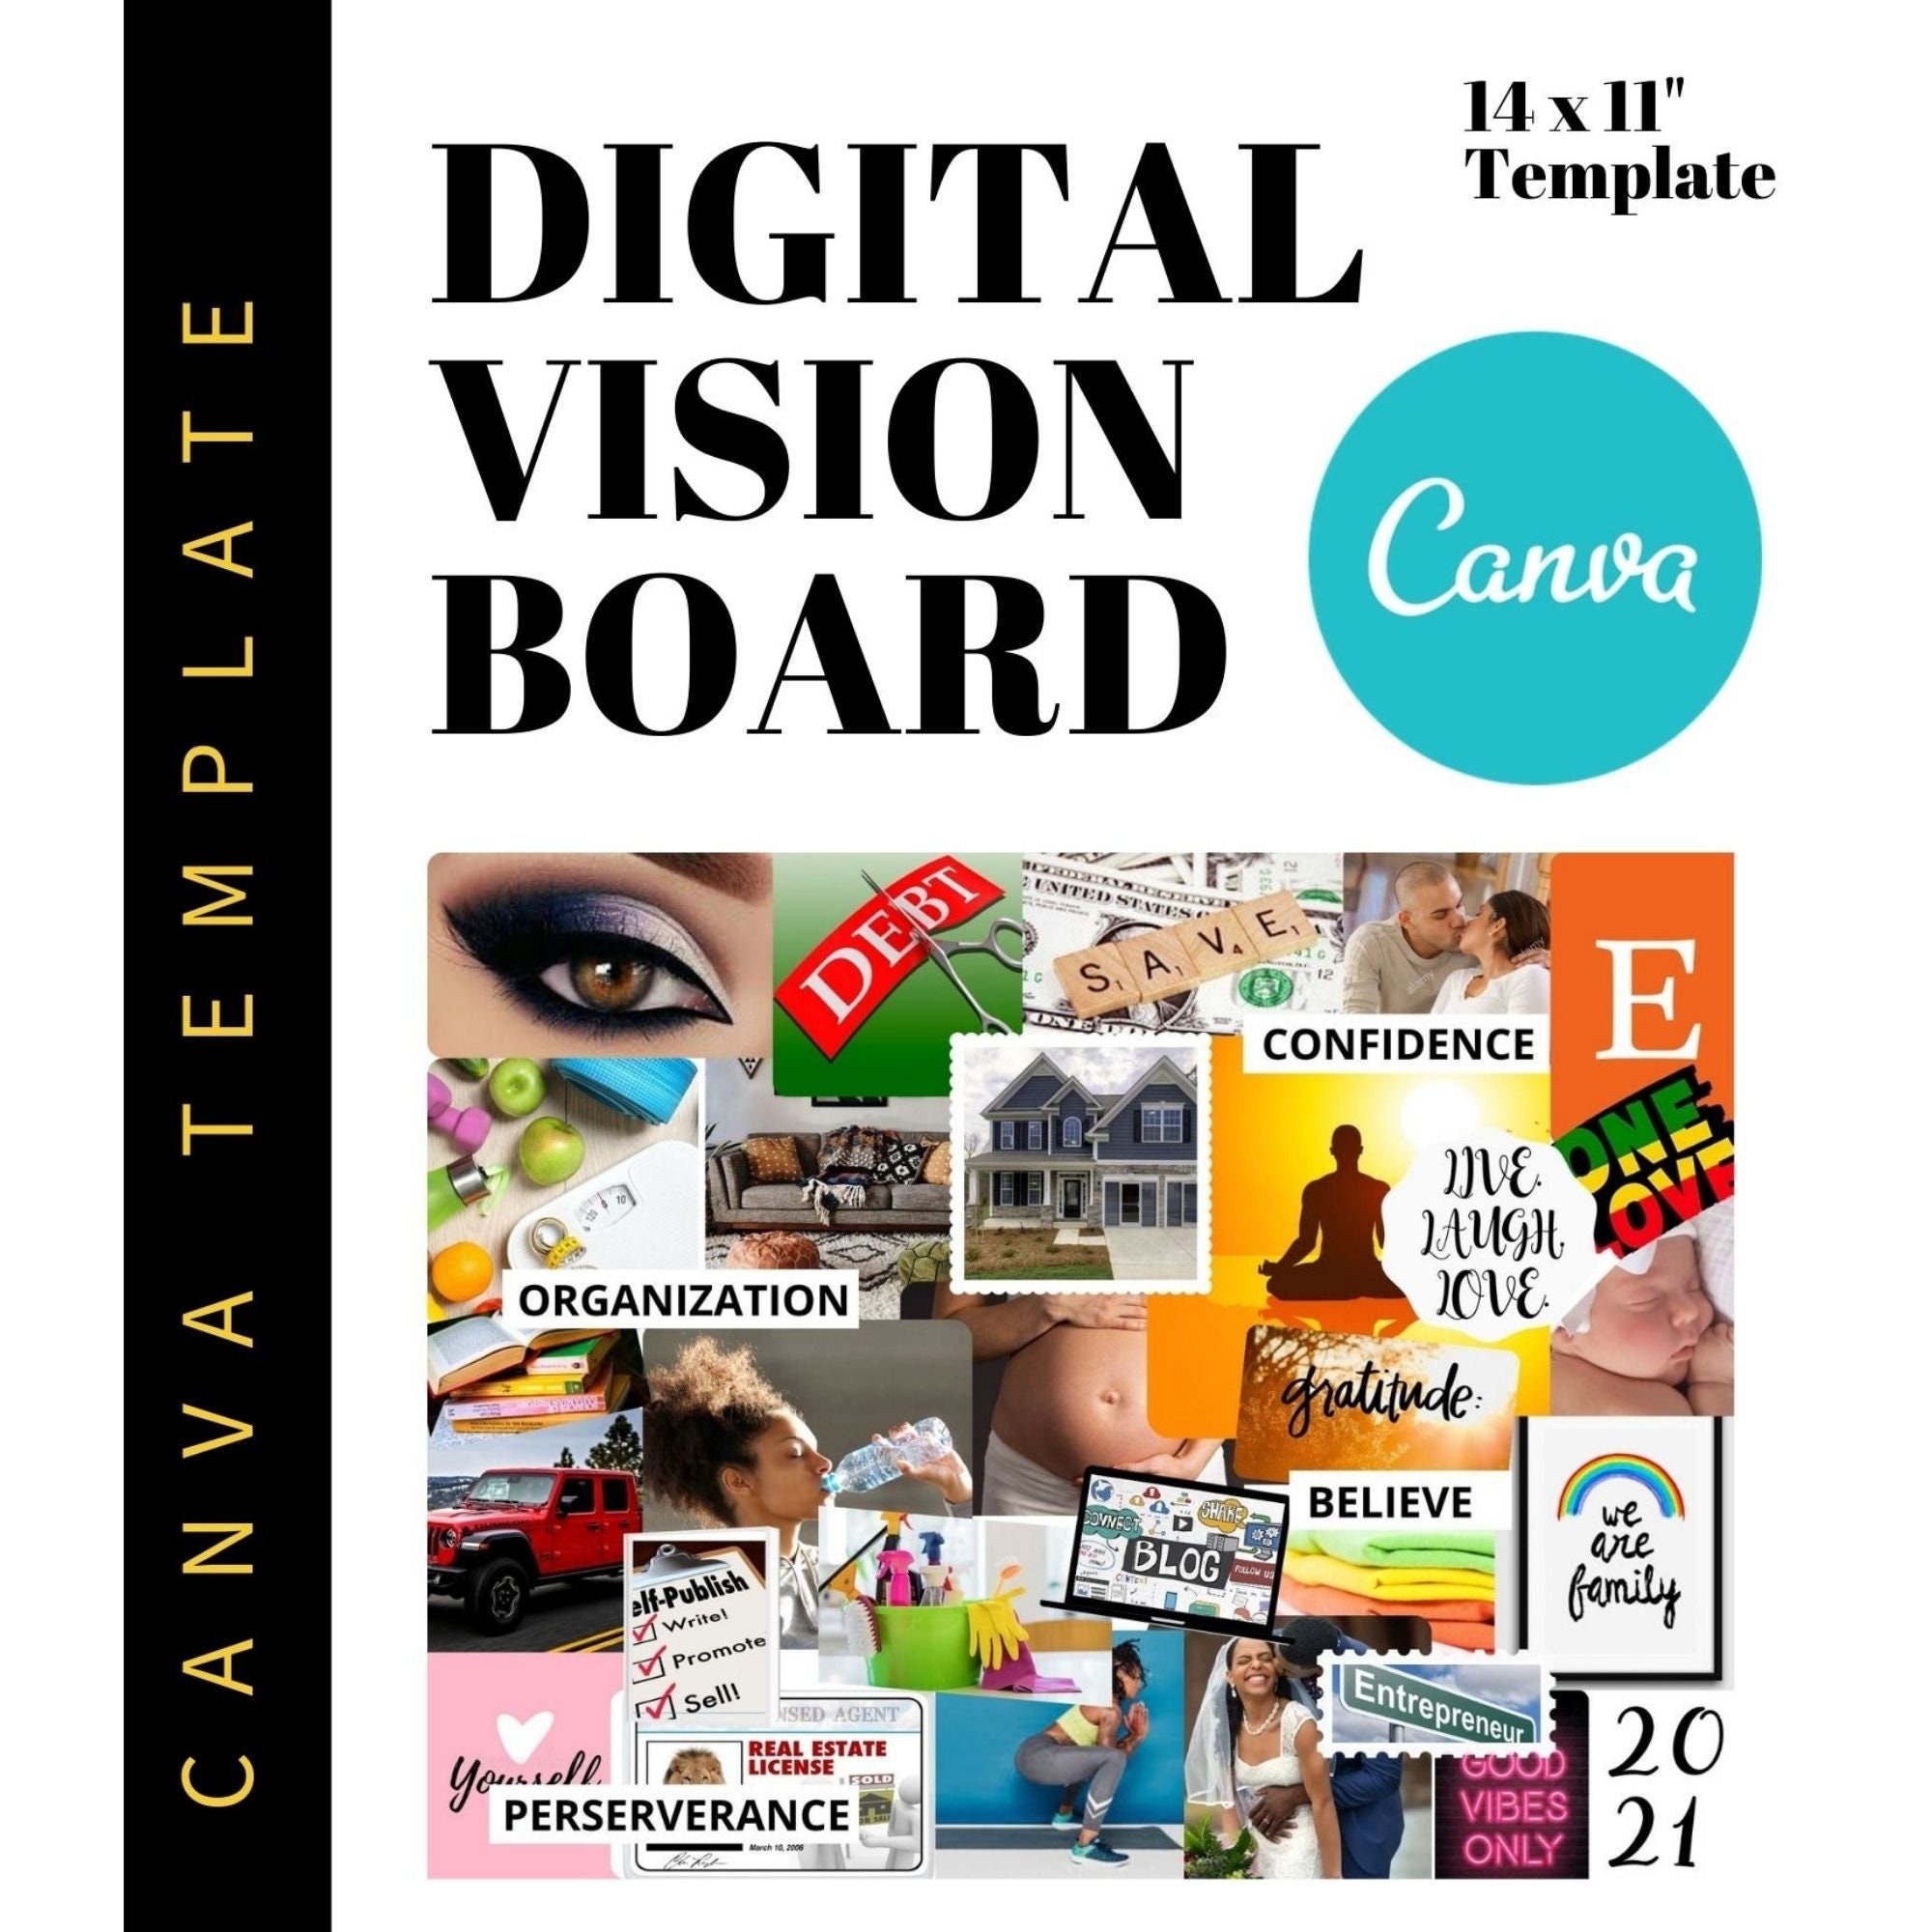 22 Digital Vision Board Template Printables Canva Online Etsy India